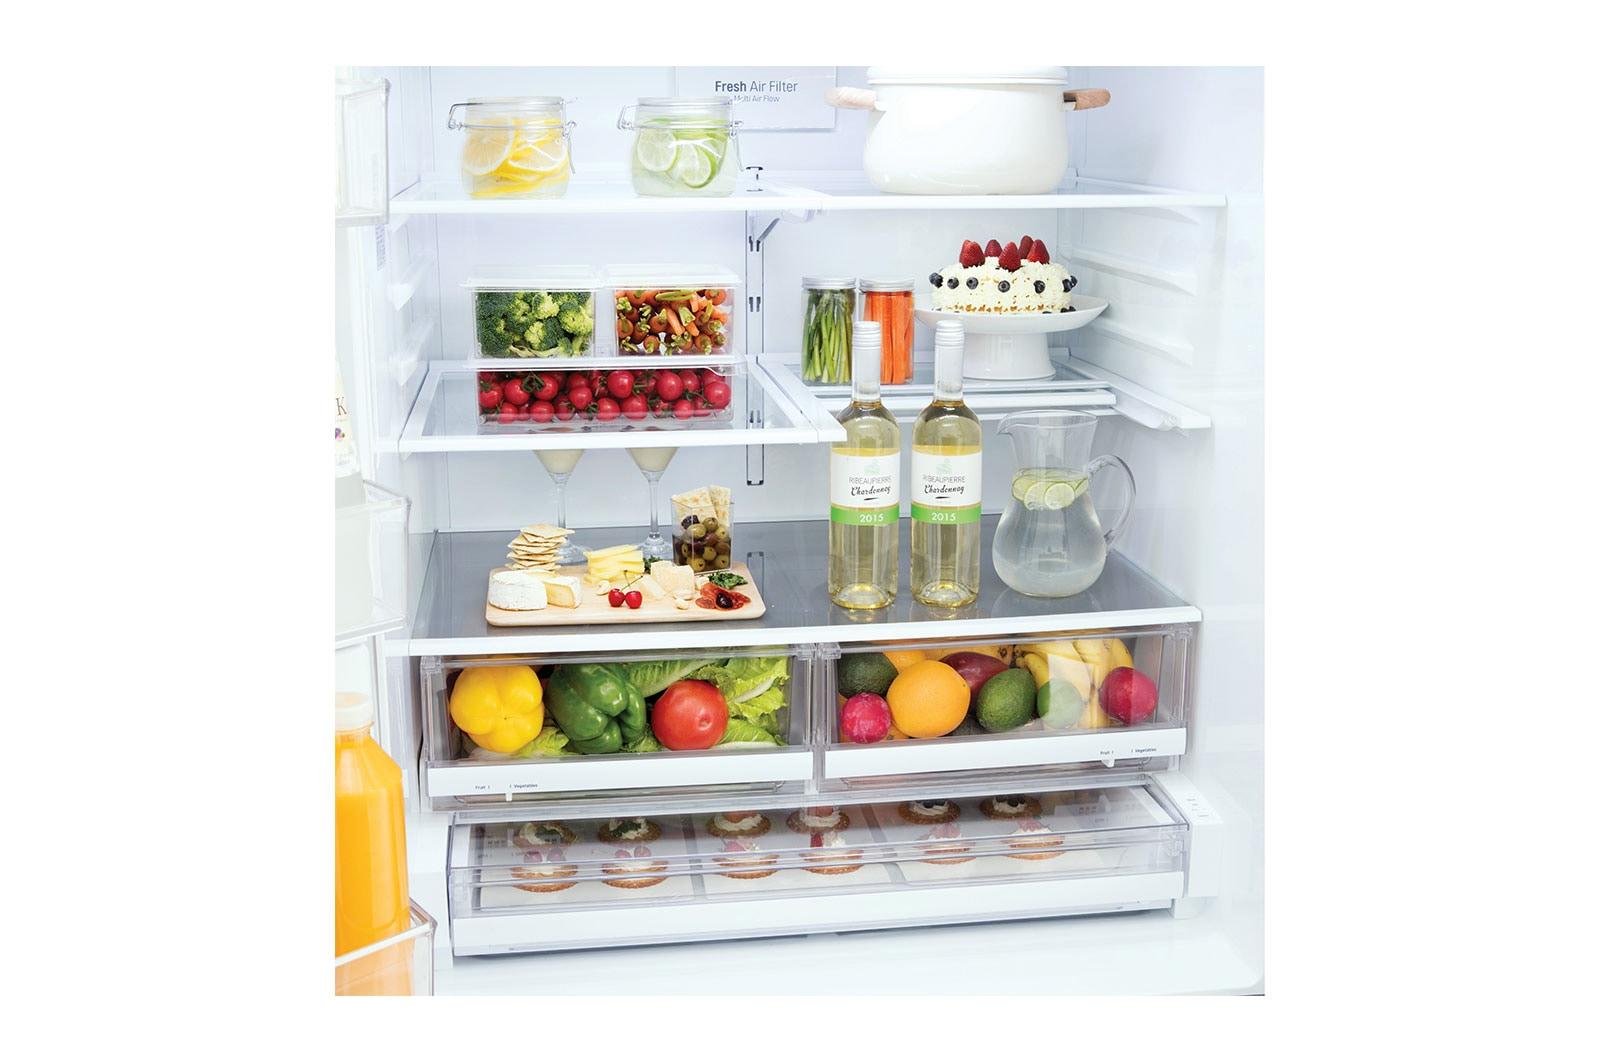 LRFWS2906D LG Appliances 29 cu ft. French Door Refrigerator with